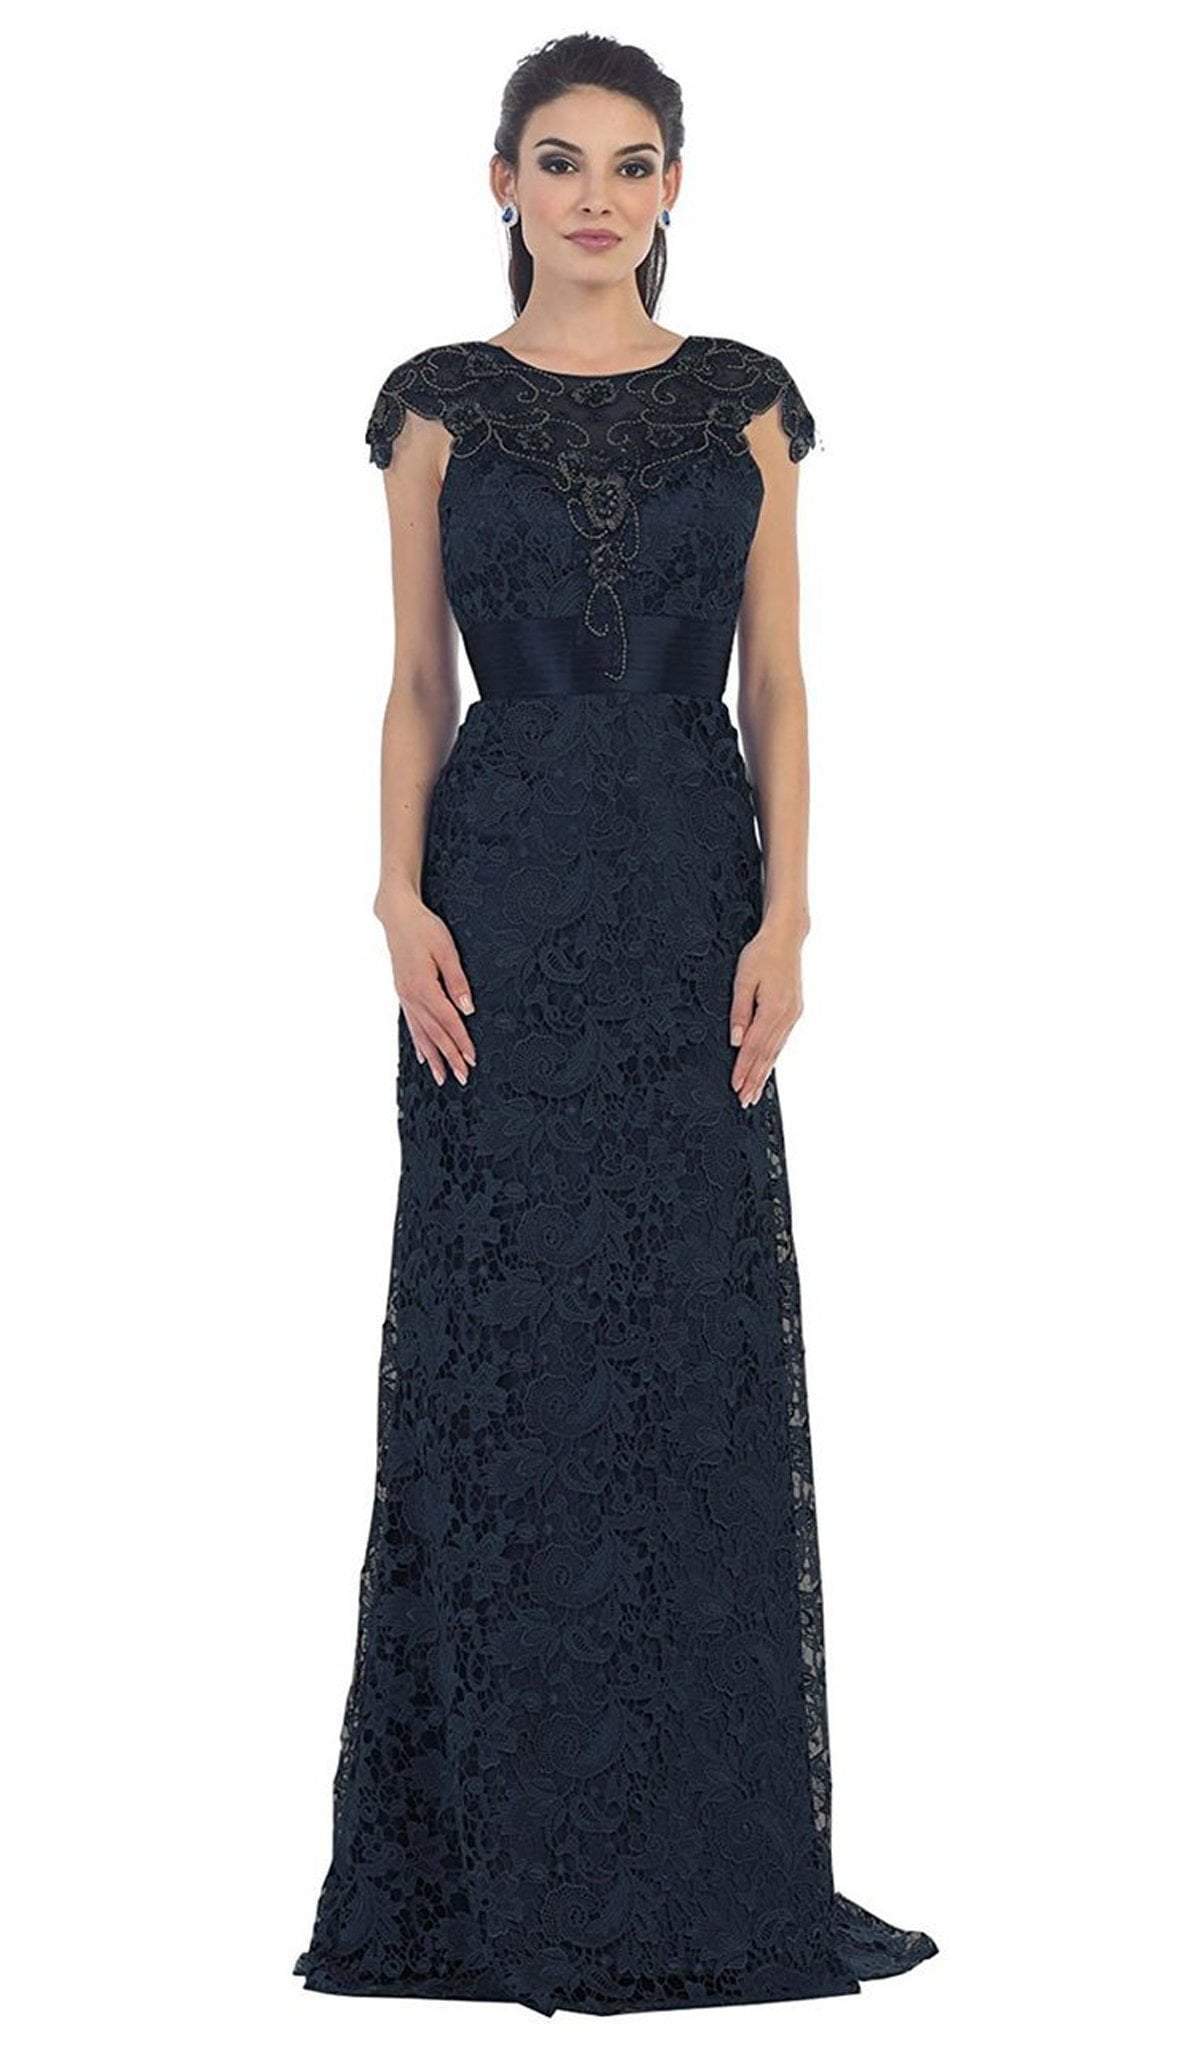 May Queen - RQ7182 Rhinestone Lace Floral Evening Gown Special Occasion Dress 6 / Navy